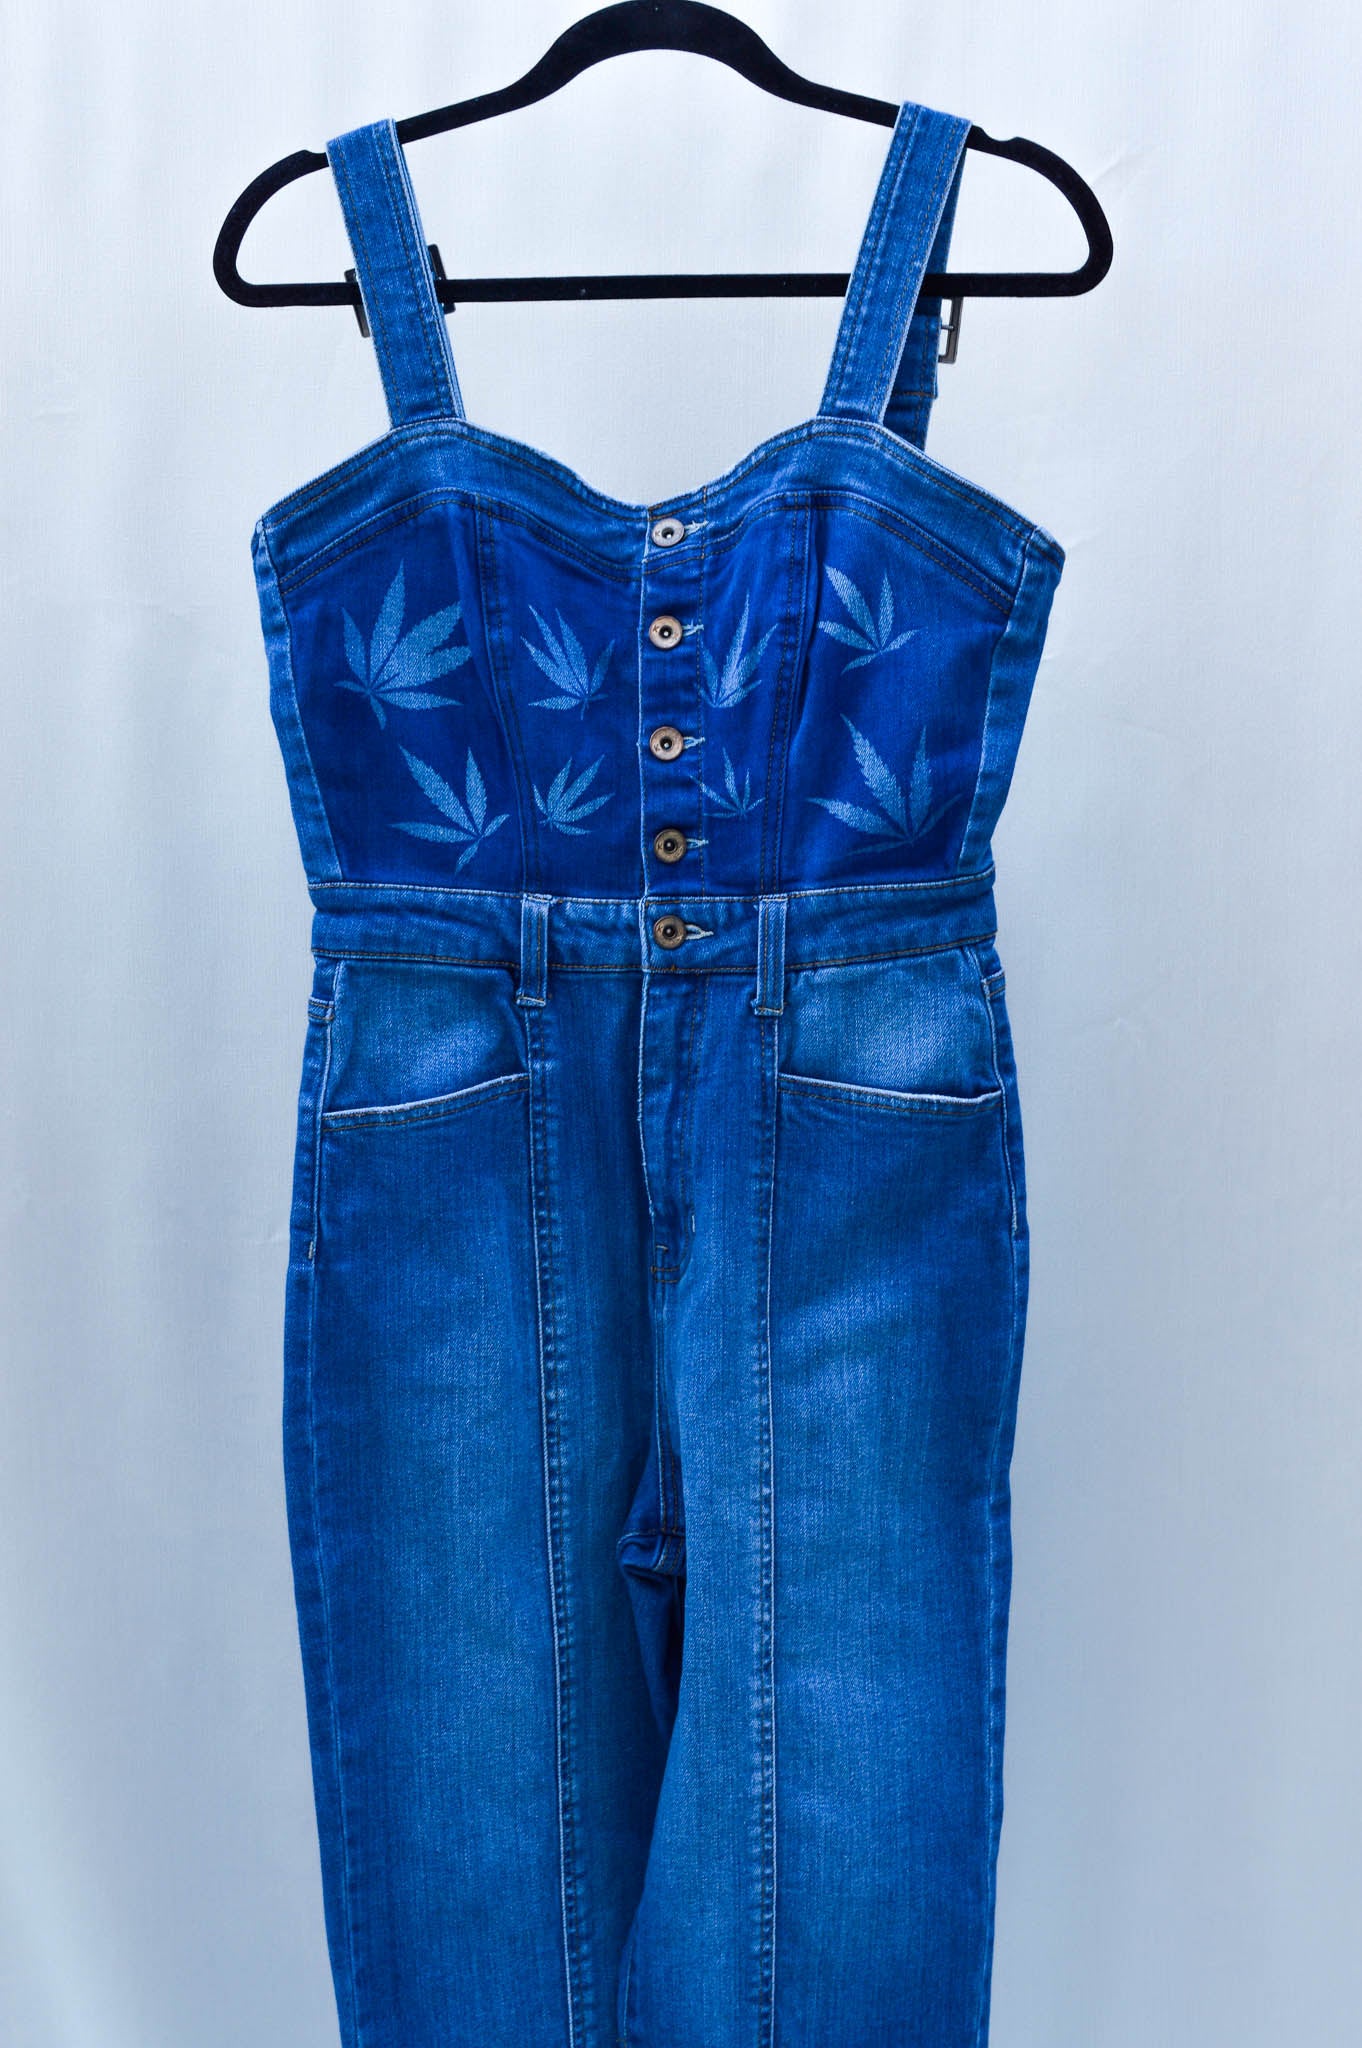 Women's Small Upcycled Denim Jumper